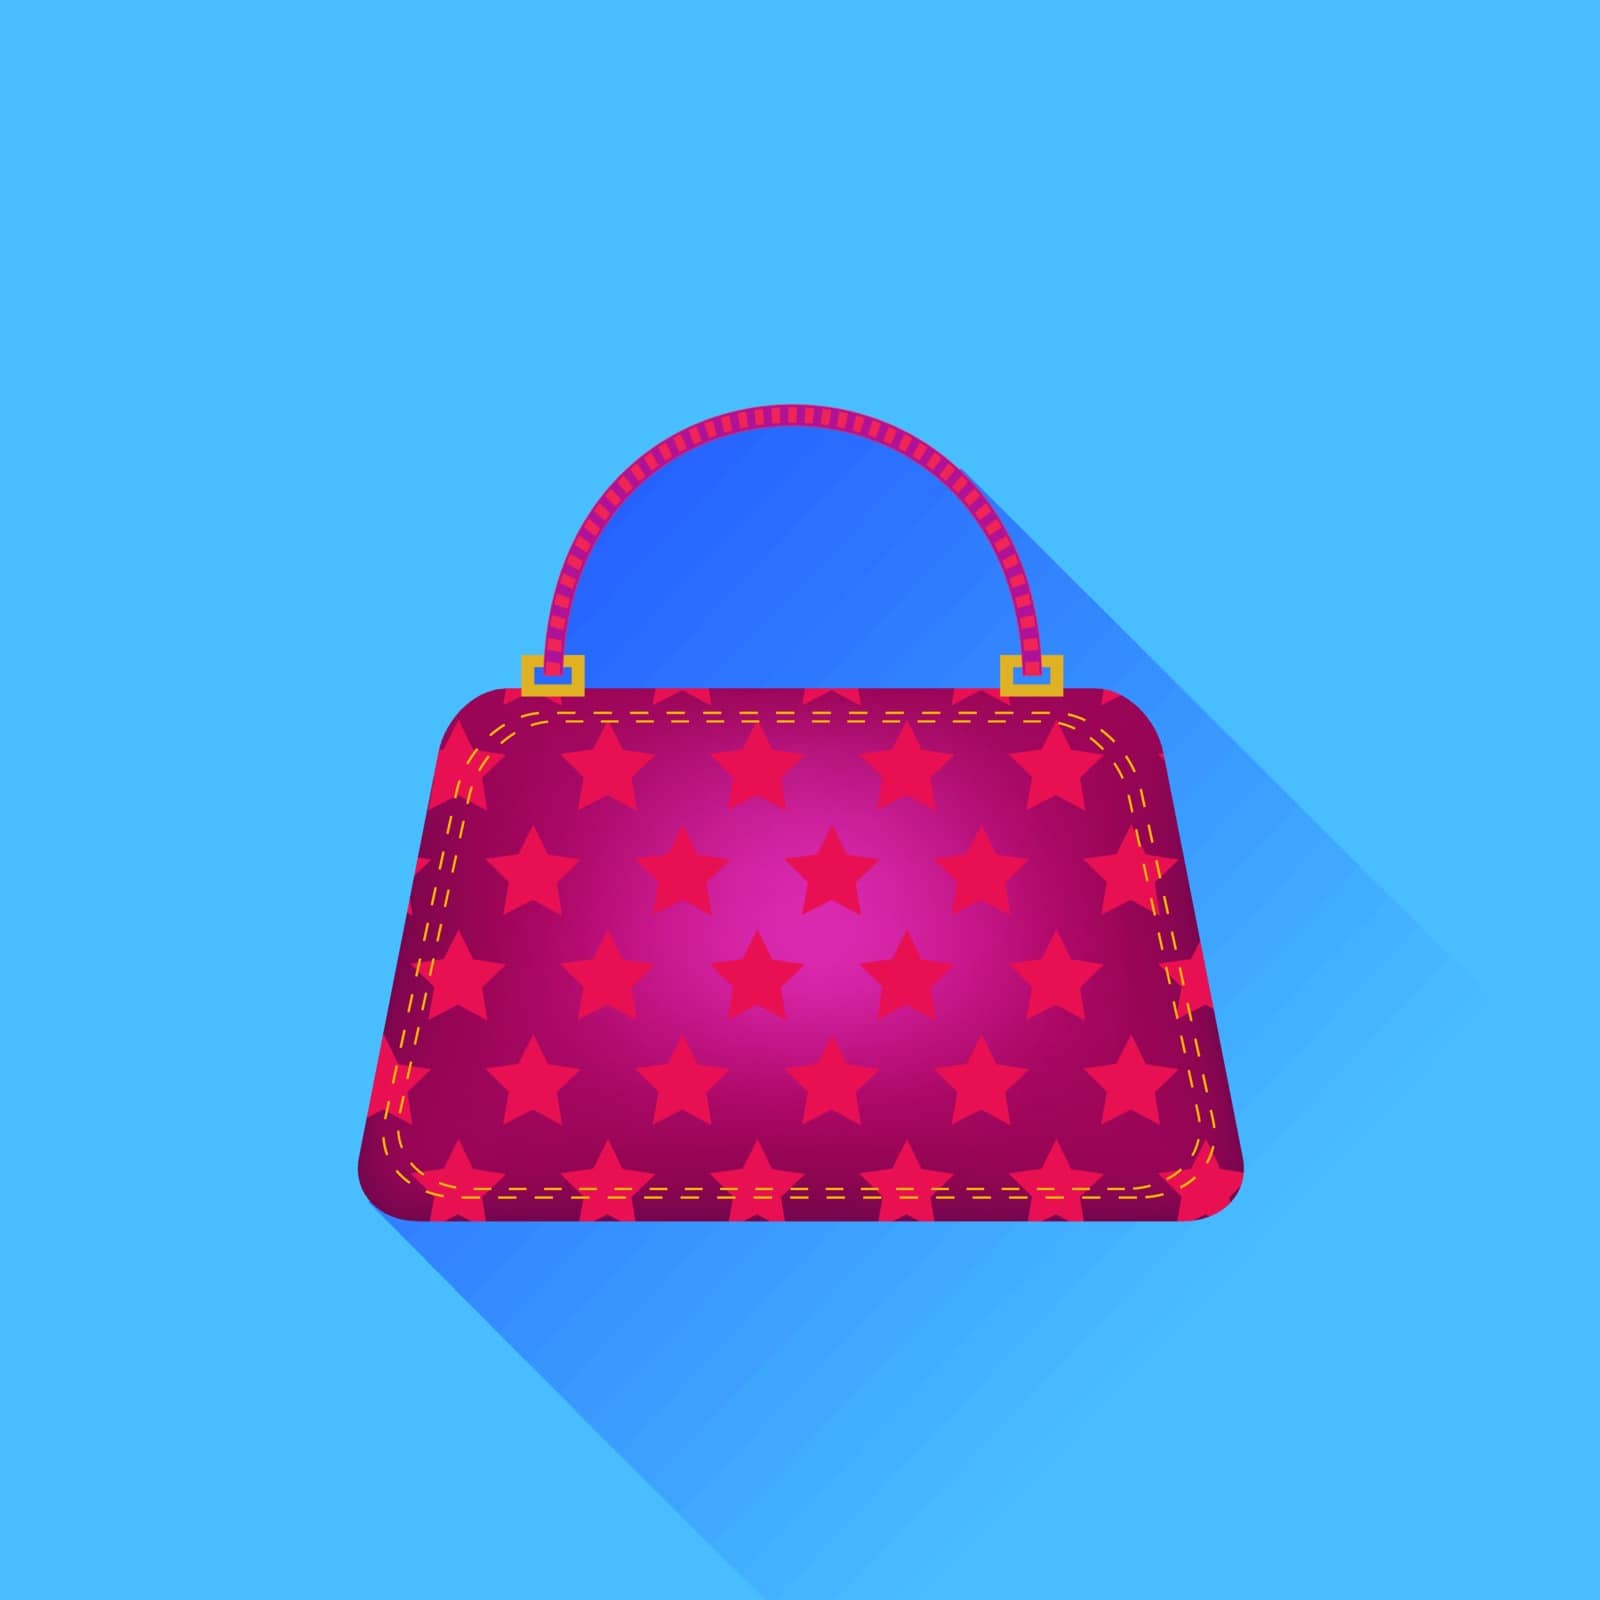 Red Handbag Isolated on Blue Background. Long Shadow.